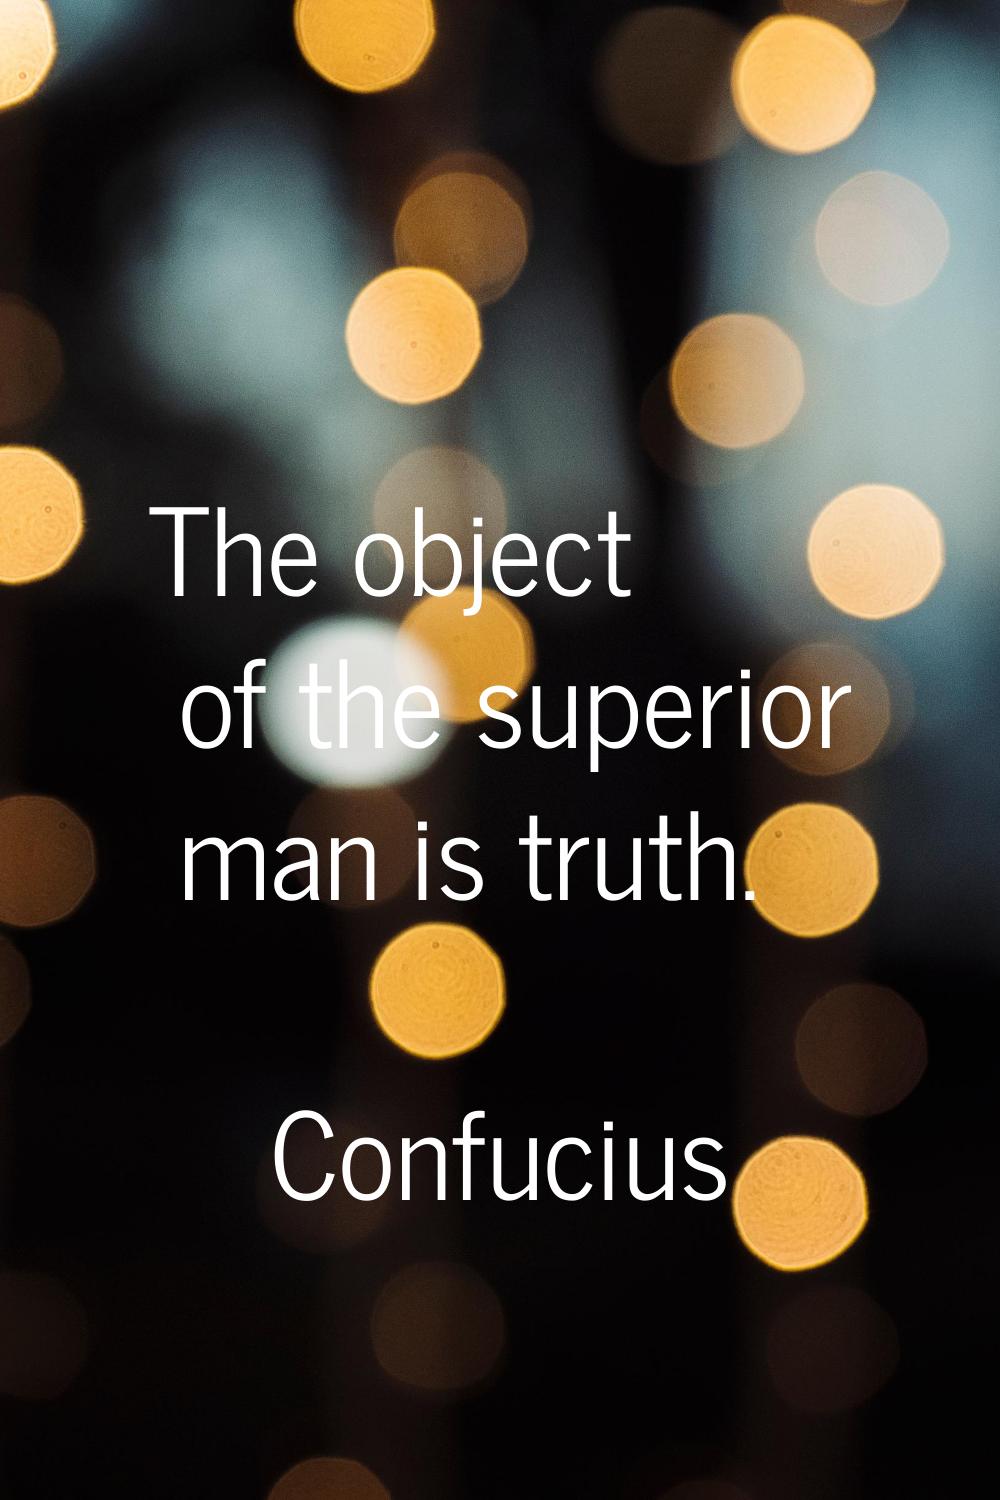 The object of the superior man is truth.